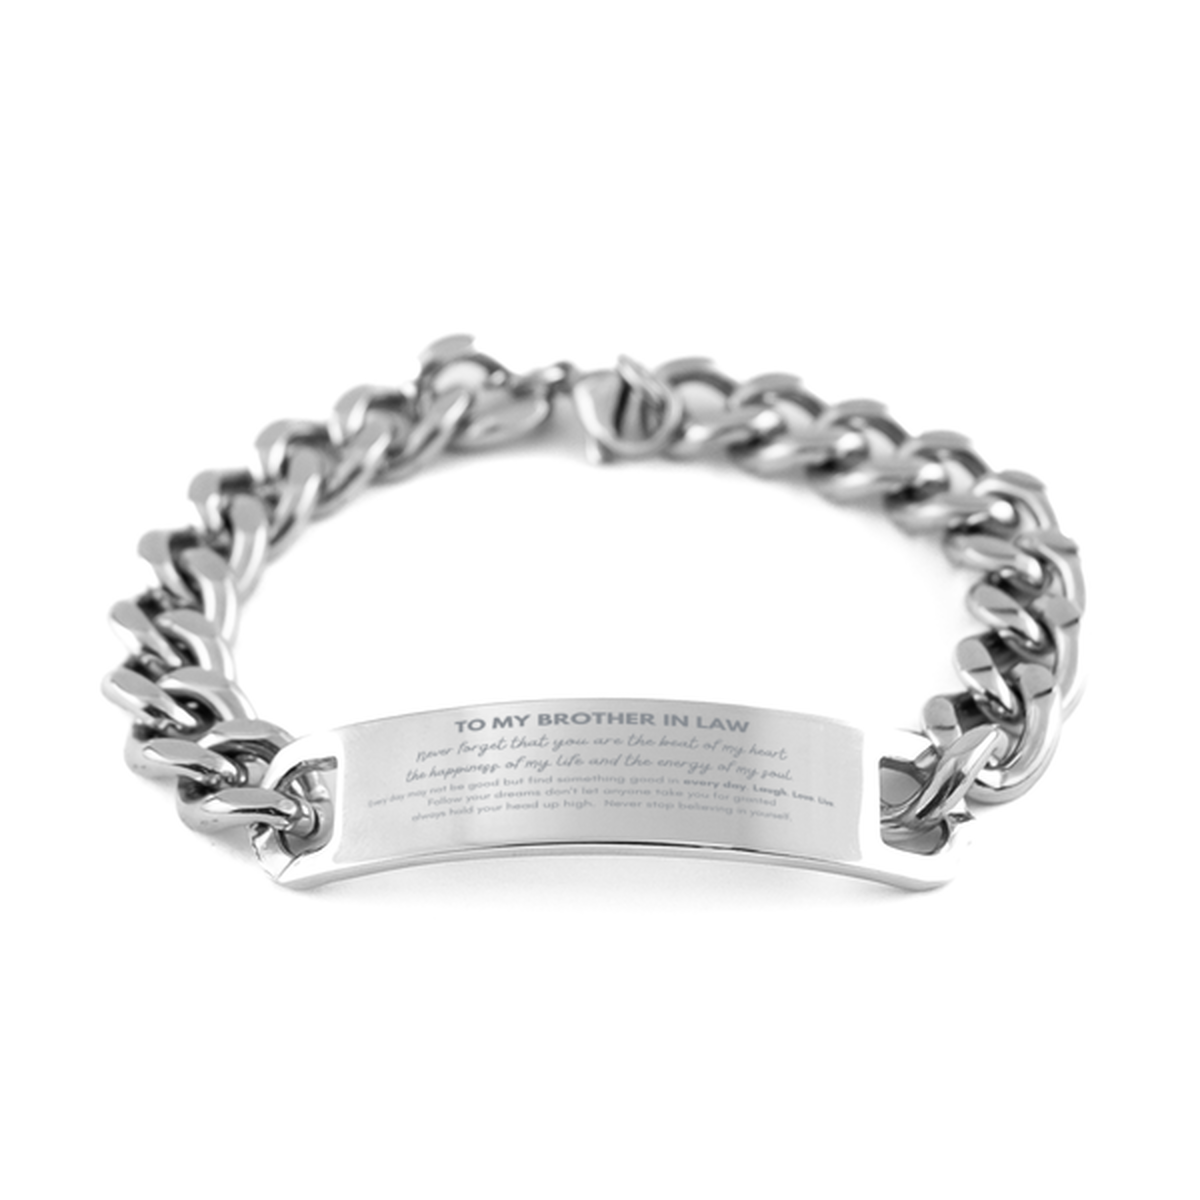 To My Brother In Law Bracelet Gifts, Christmas Brother In Law Cuban Chain Stainless Steel Bracelet Present, Birthday Unique Motivational For Brother In Law, To My Brother In Law Never forget that you are the beat of my heart the happiness of my life and t